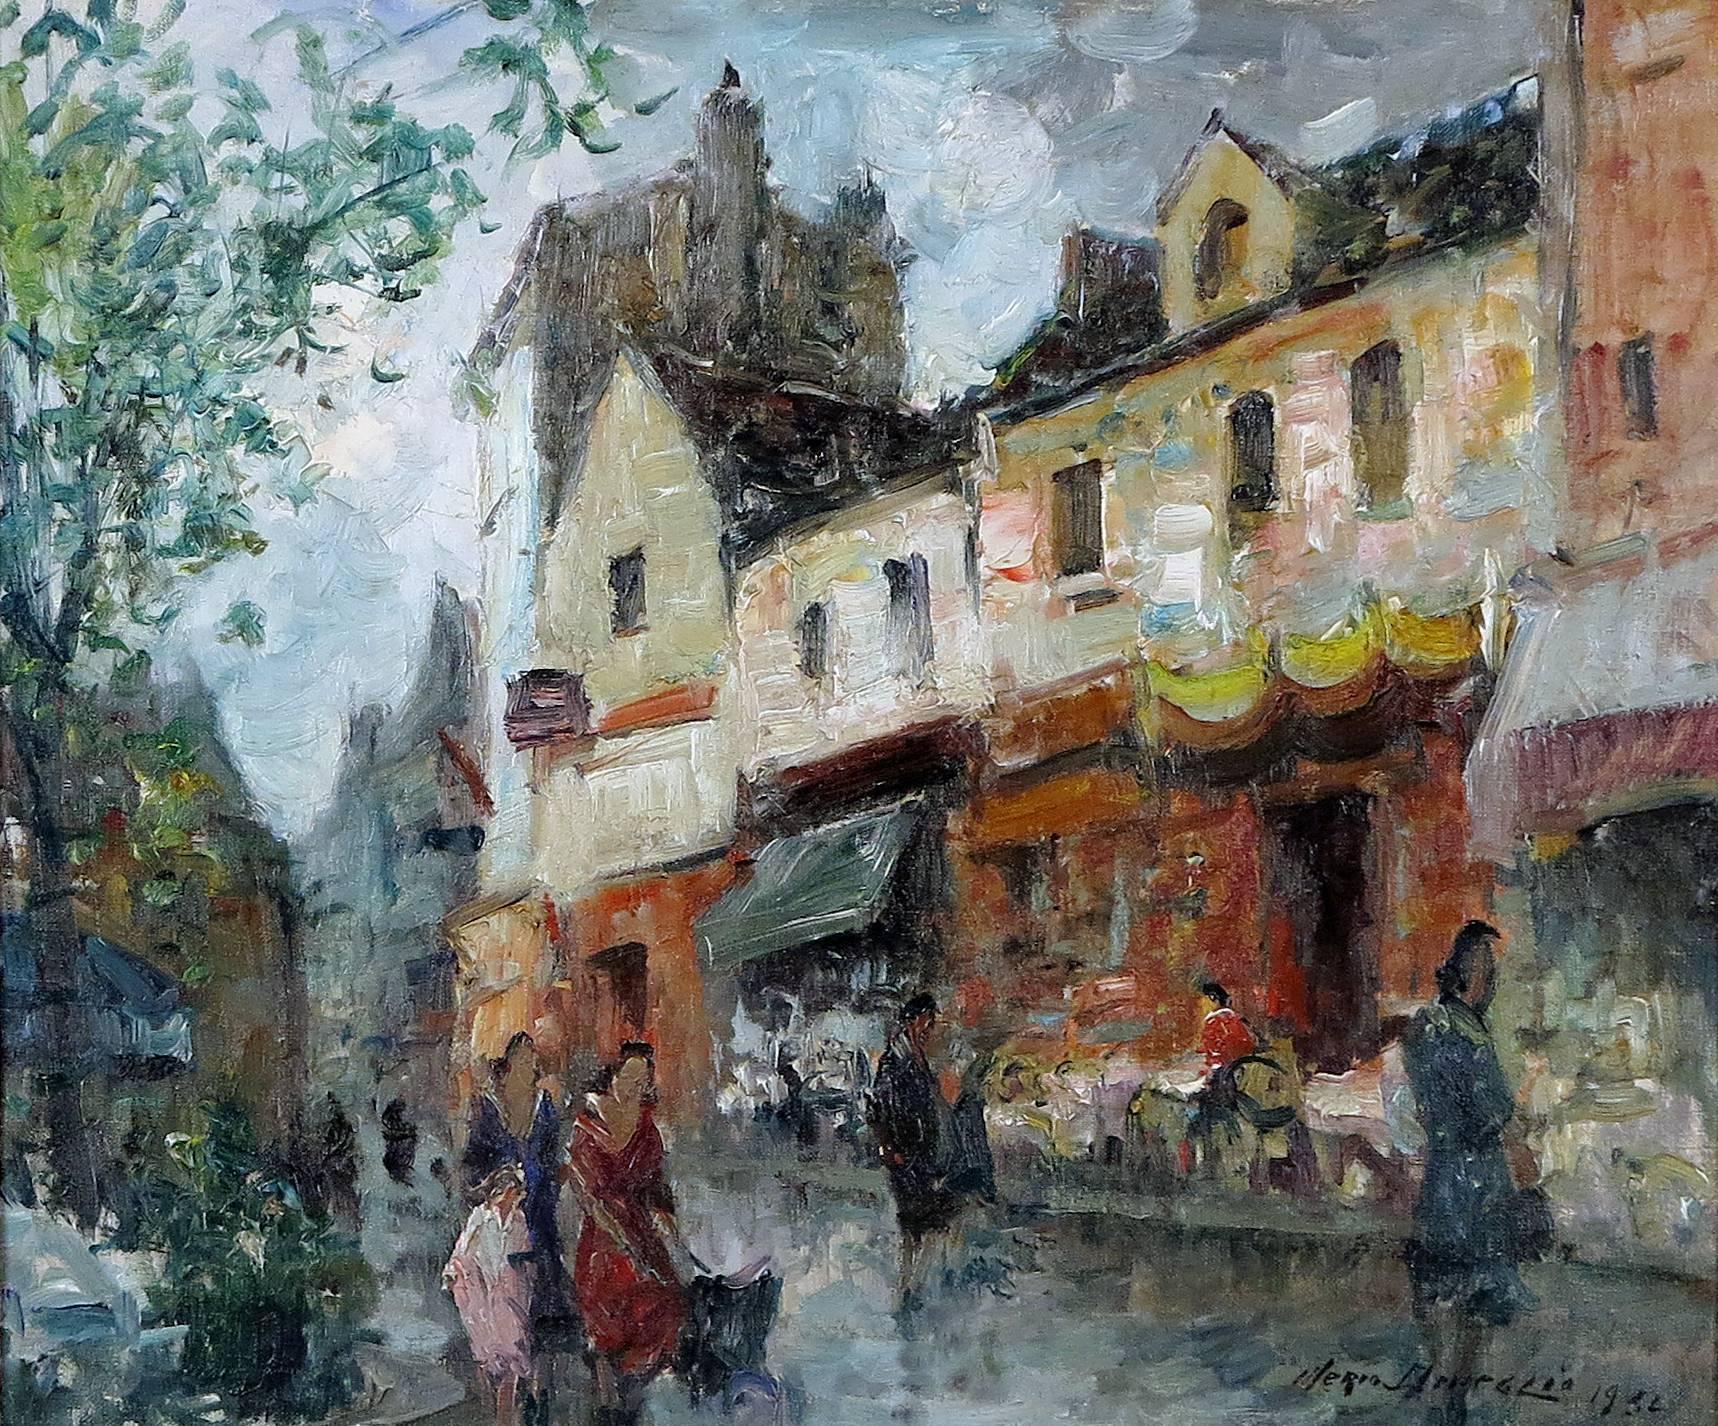 Merio Ameglio 
Italian, 1897-1970
Parisian street scene

Oil on canvas
18 by 21 ½ in. with frame 26 by 29 ½ in.
Signed lower left

Merio noted impressionist painter primarily known for his landscapes and cityscapes, seascapes and harbor